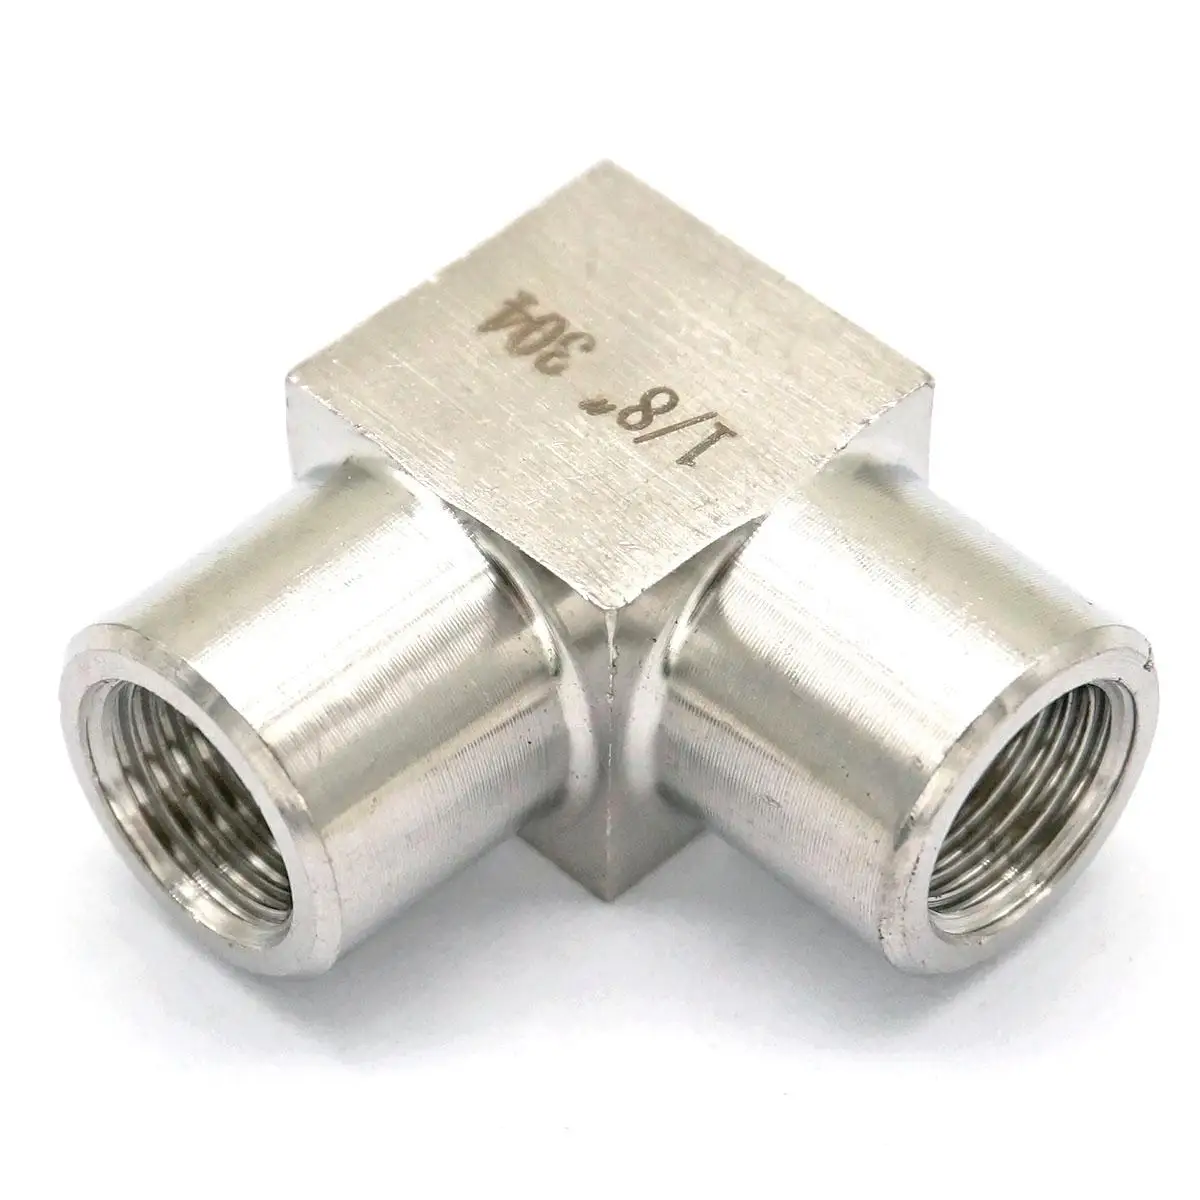 STAINLESS STEEL 304 BSP 90° ELBOW FEMALE THREADED REDUCER FITTING CONNECTOR FxF 